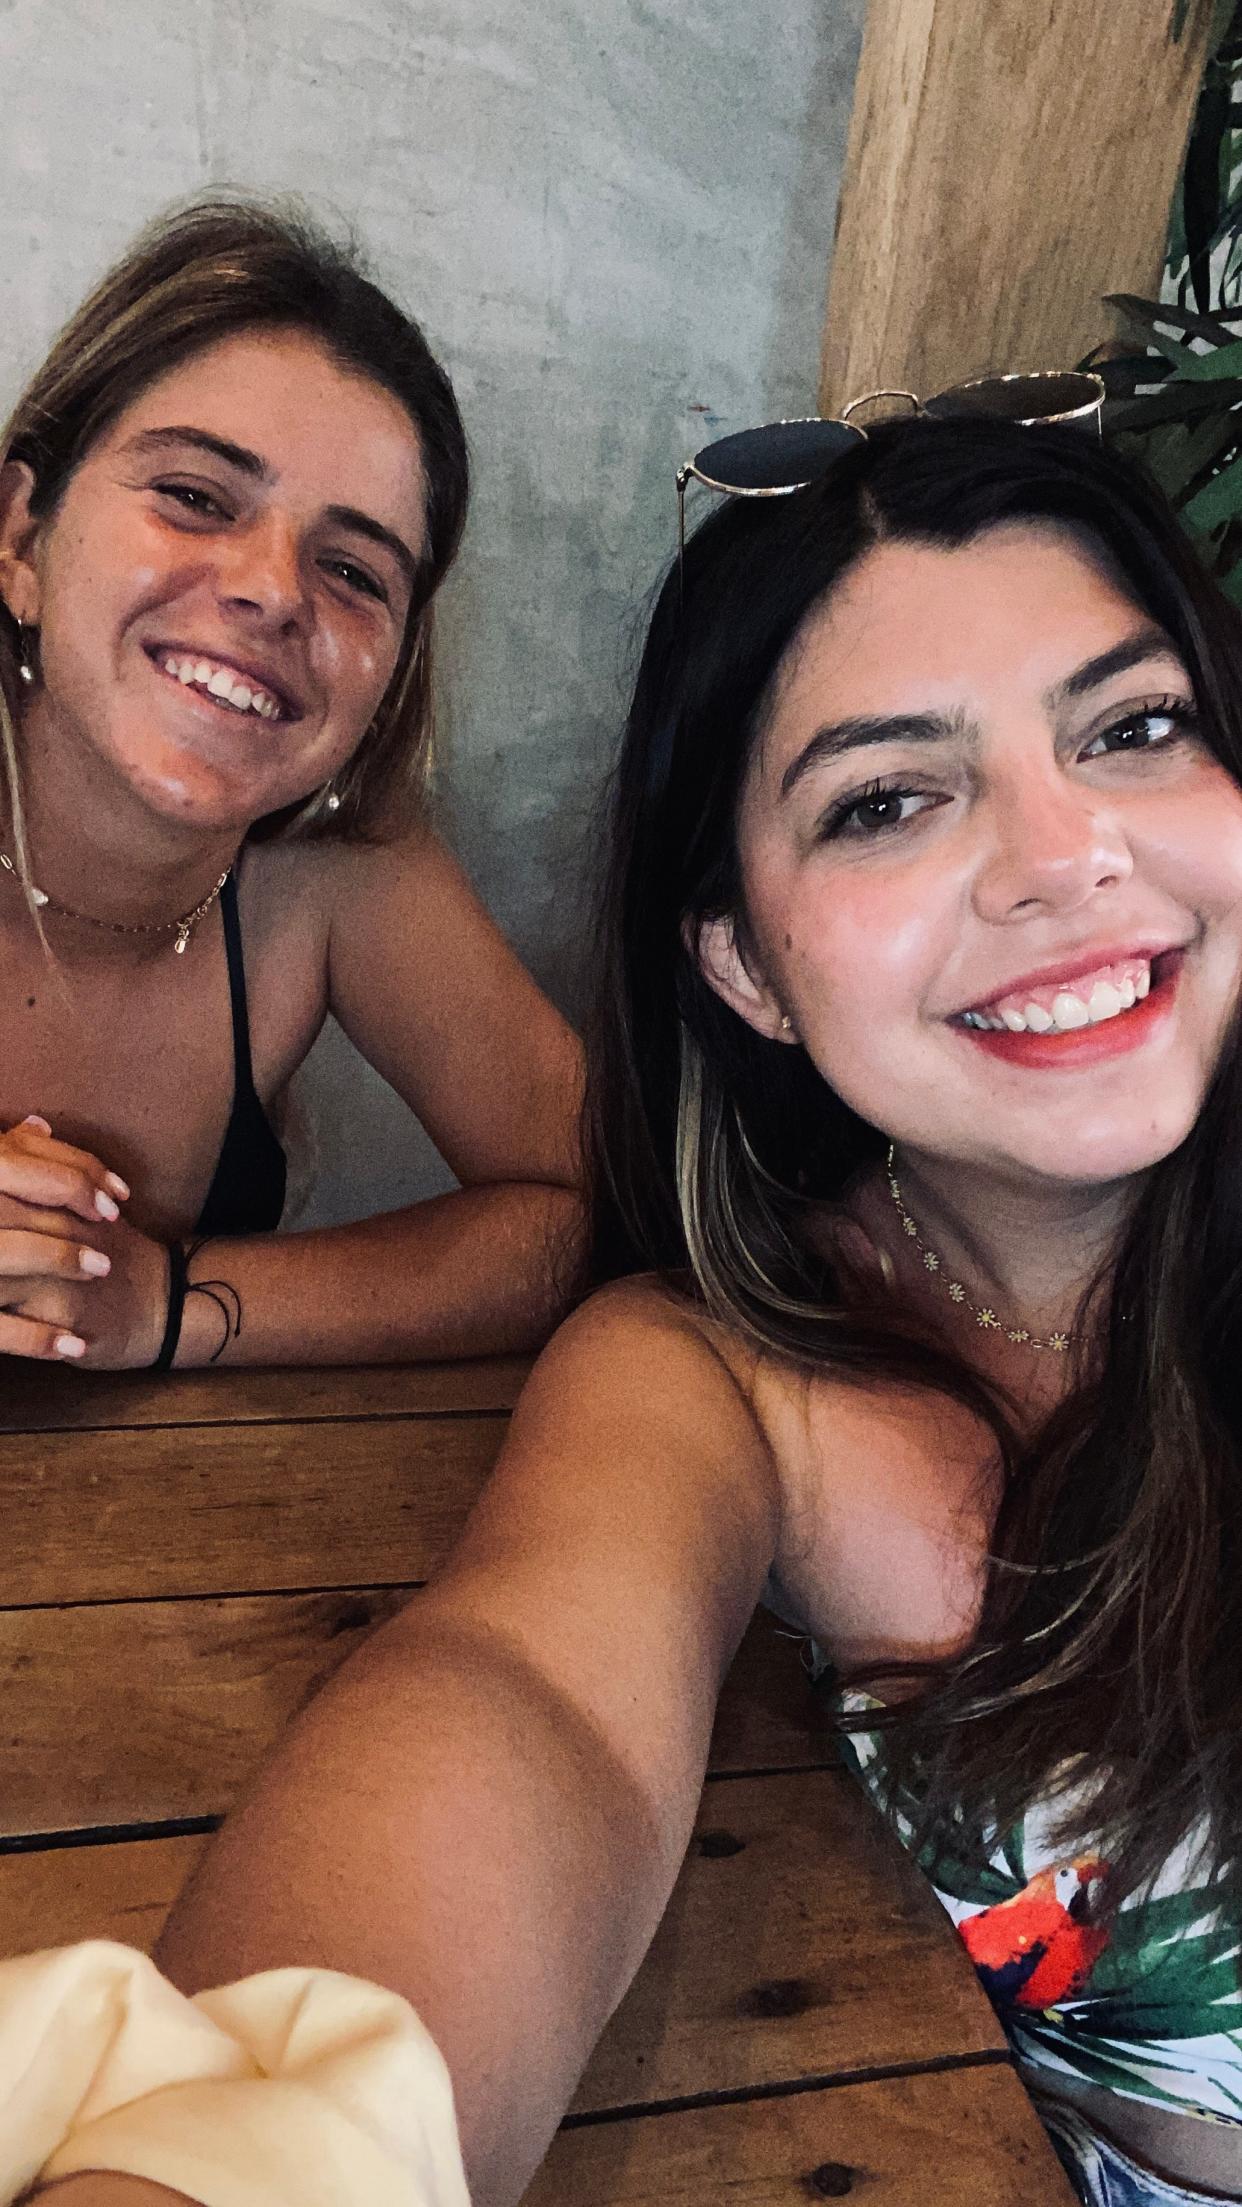 A digital nomad named Giovanna Paola Ramos went to Puerto Escondido in Mexico and met up with a Greether guide named Summer, for her first solo trip ever.